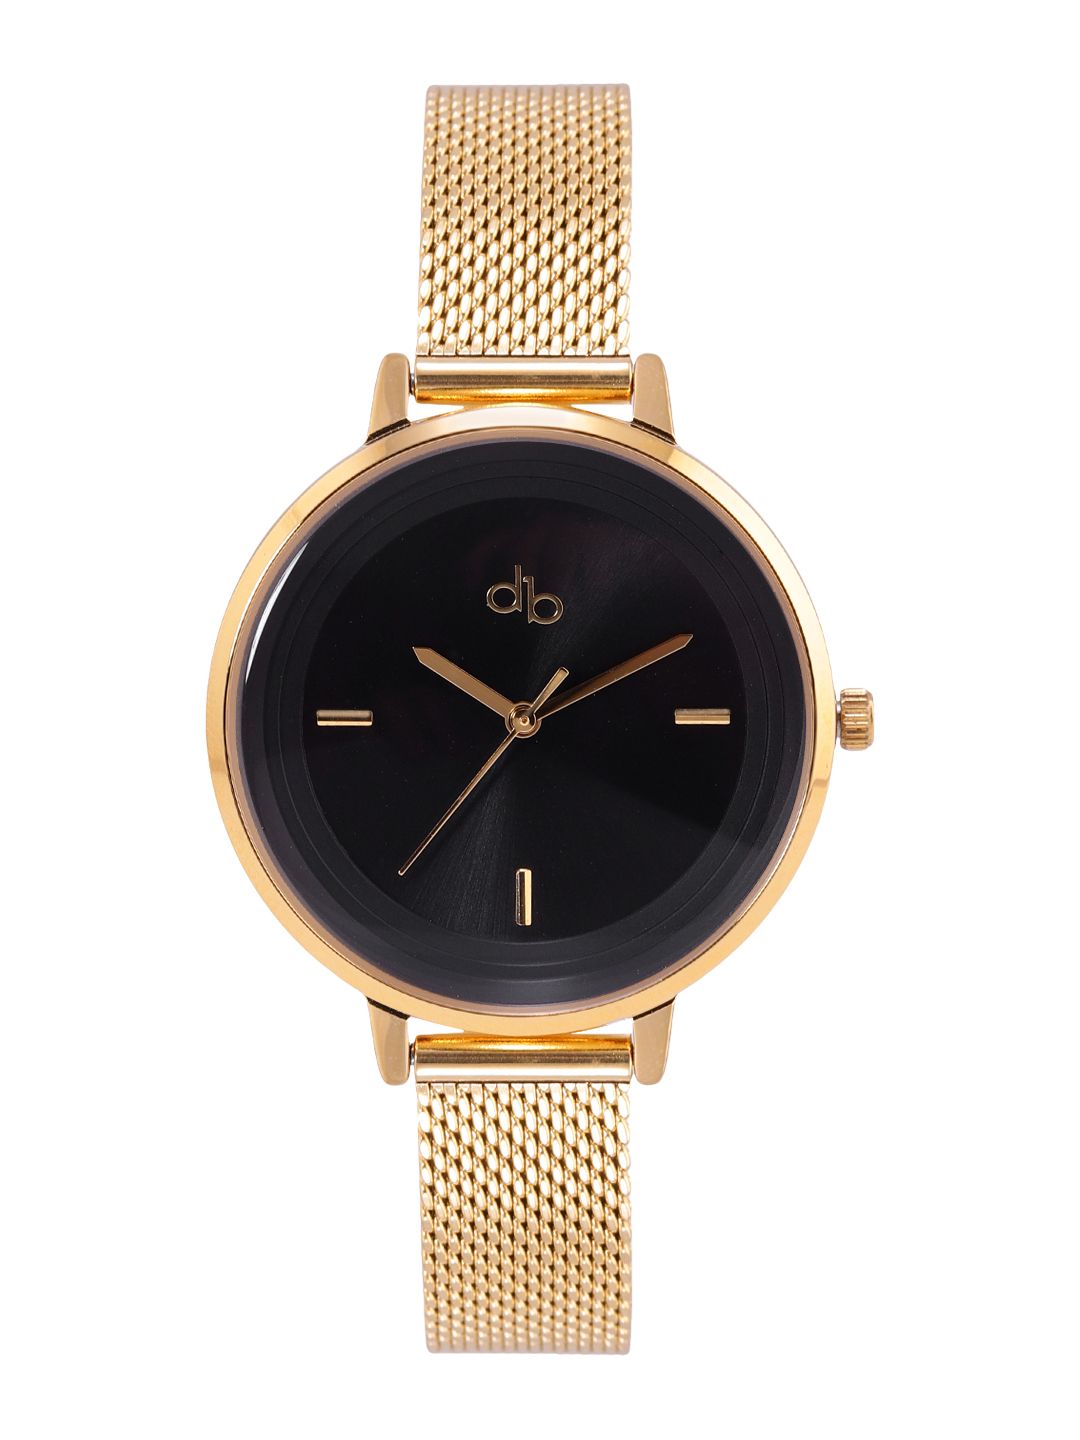 DressBerry Women Black Patterned Dial & Gold Toned Bracelet Style Analogue Watch DB-05-04 Price in India